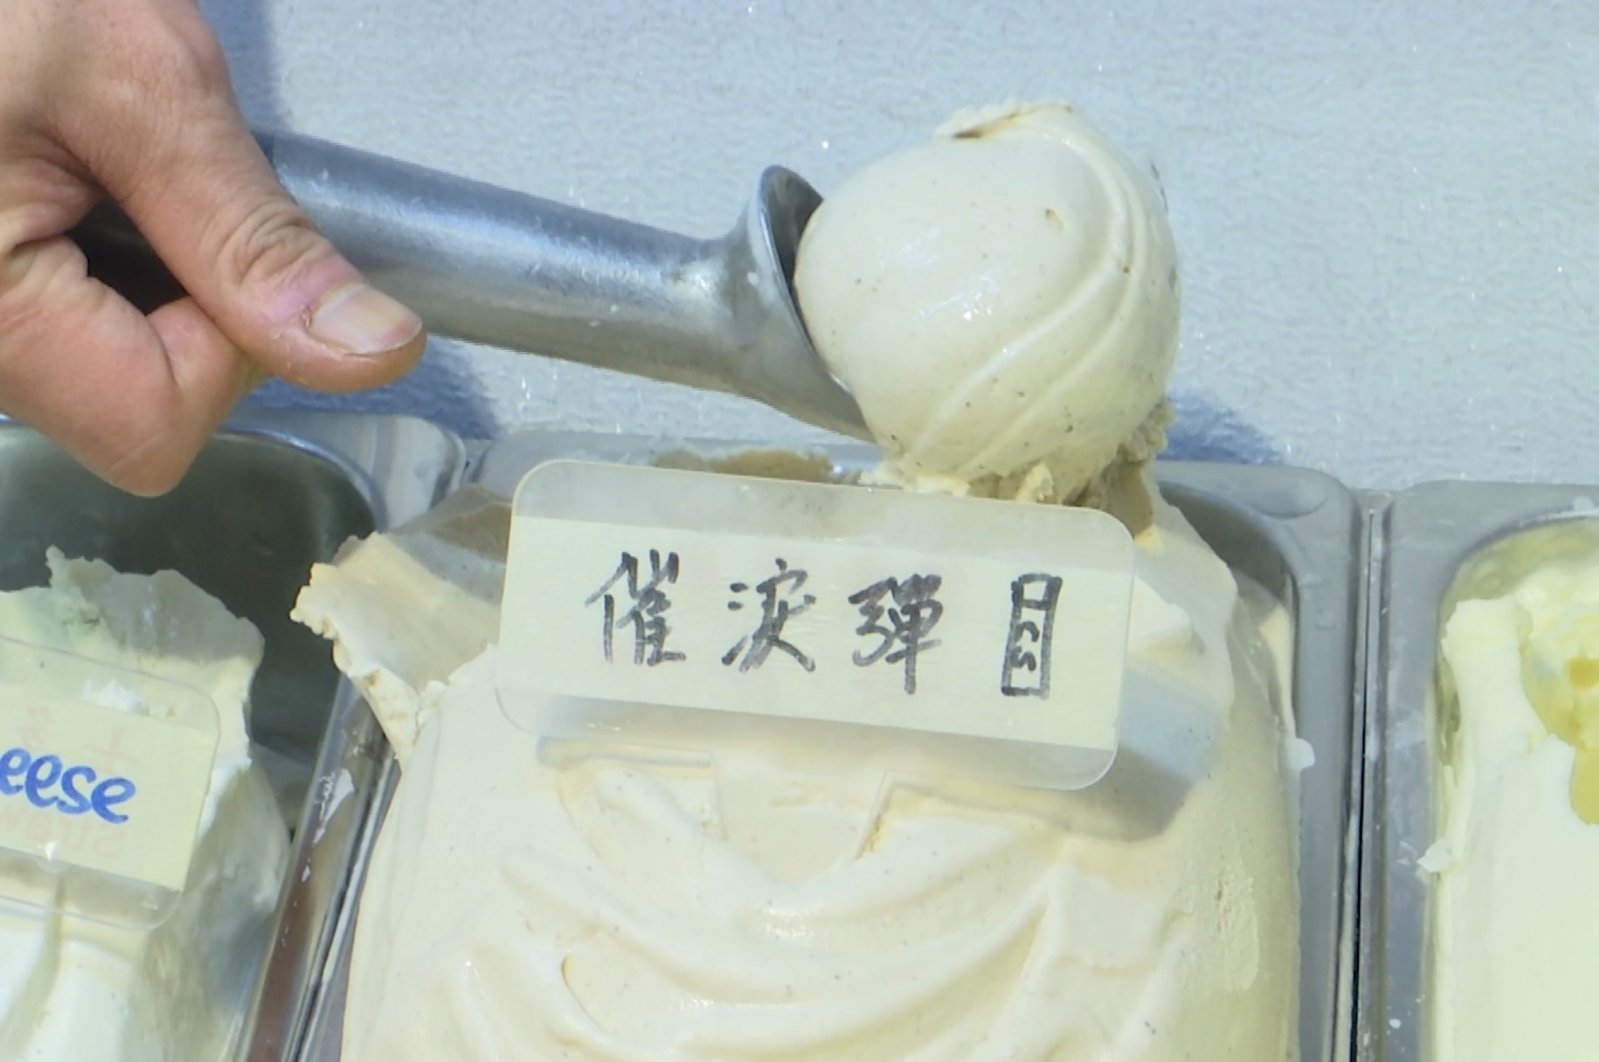 A scoop of tear gas flavored ice cream, in Hong Kong, May 4, 2020. (AP Photo)